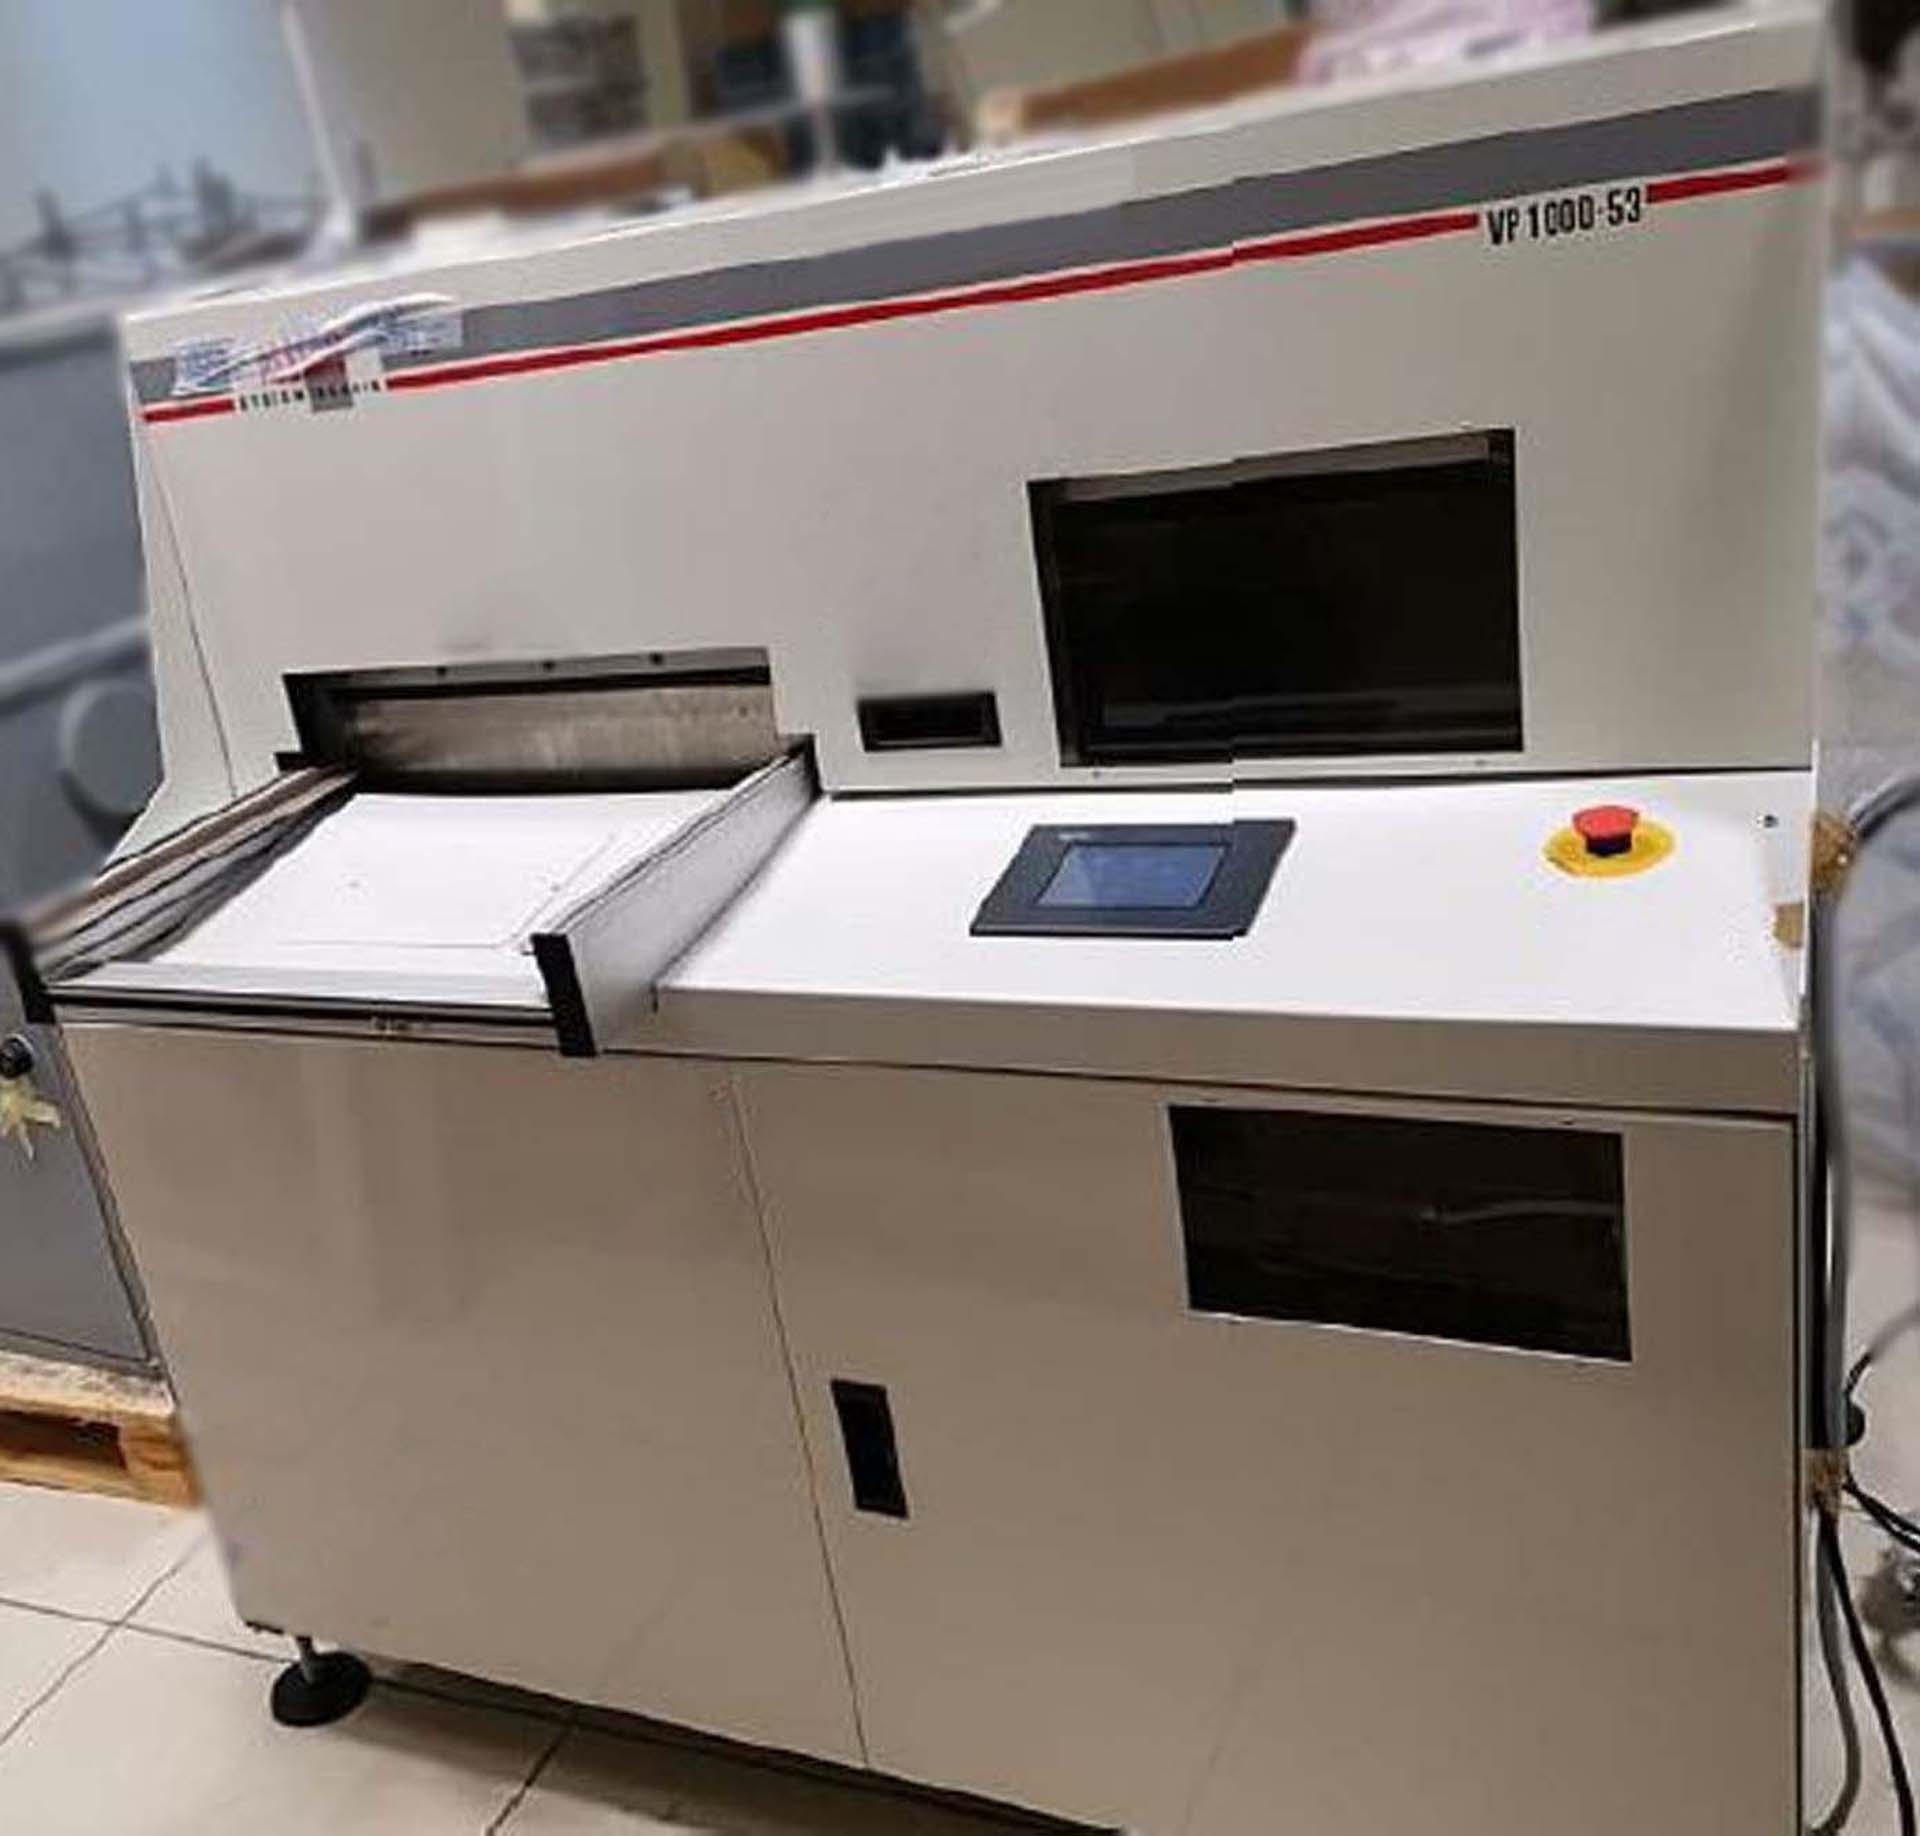 Photo Used ASSCON VP 1000-53 For Sale